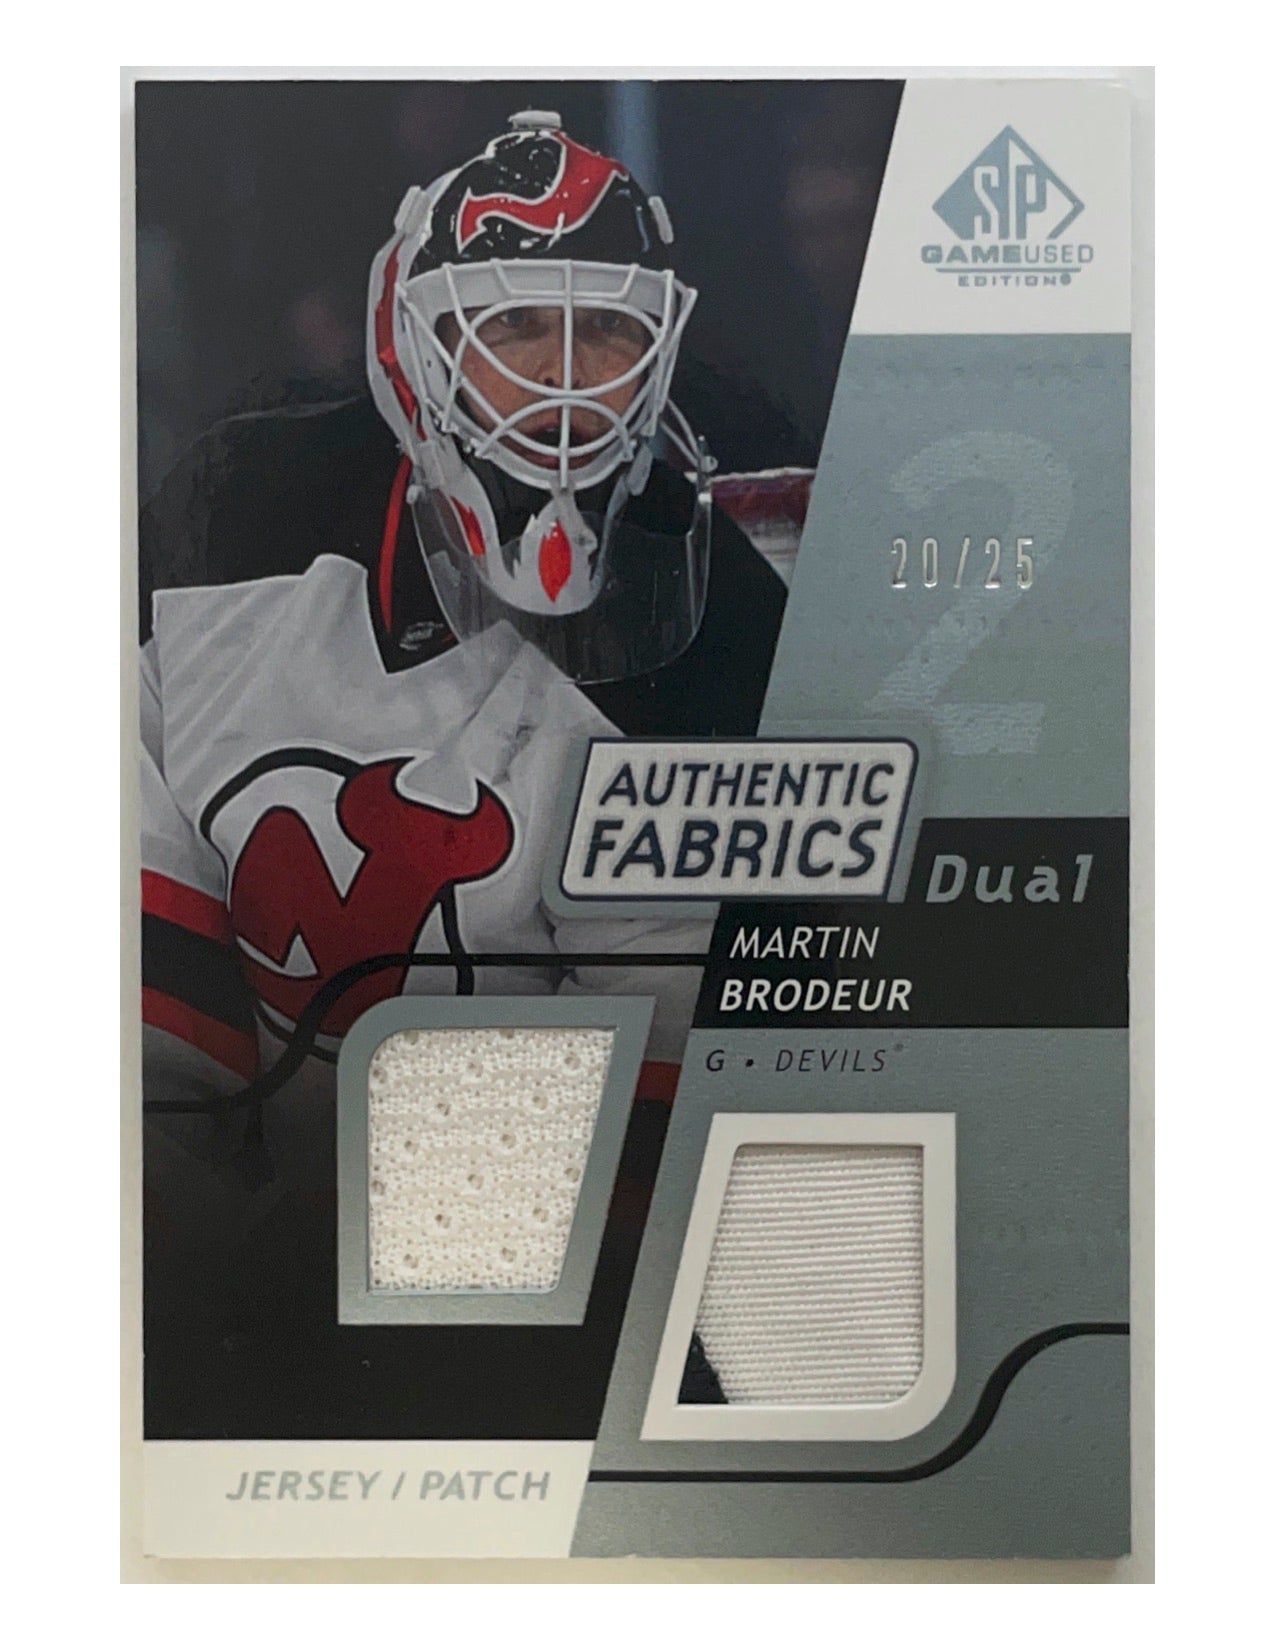 Martin Brodeur 2008-09 Upper Deck SP Game Used Authentic Fabrics Dual Jersey Patch #AF-MB - 20/25